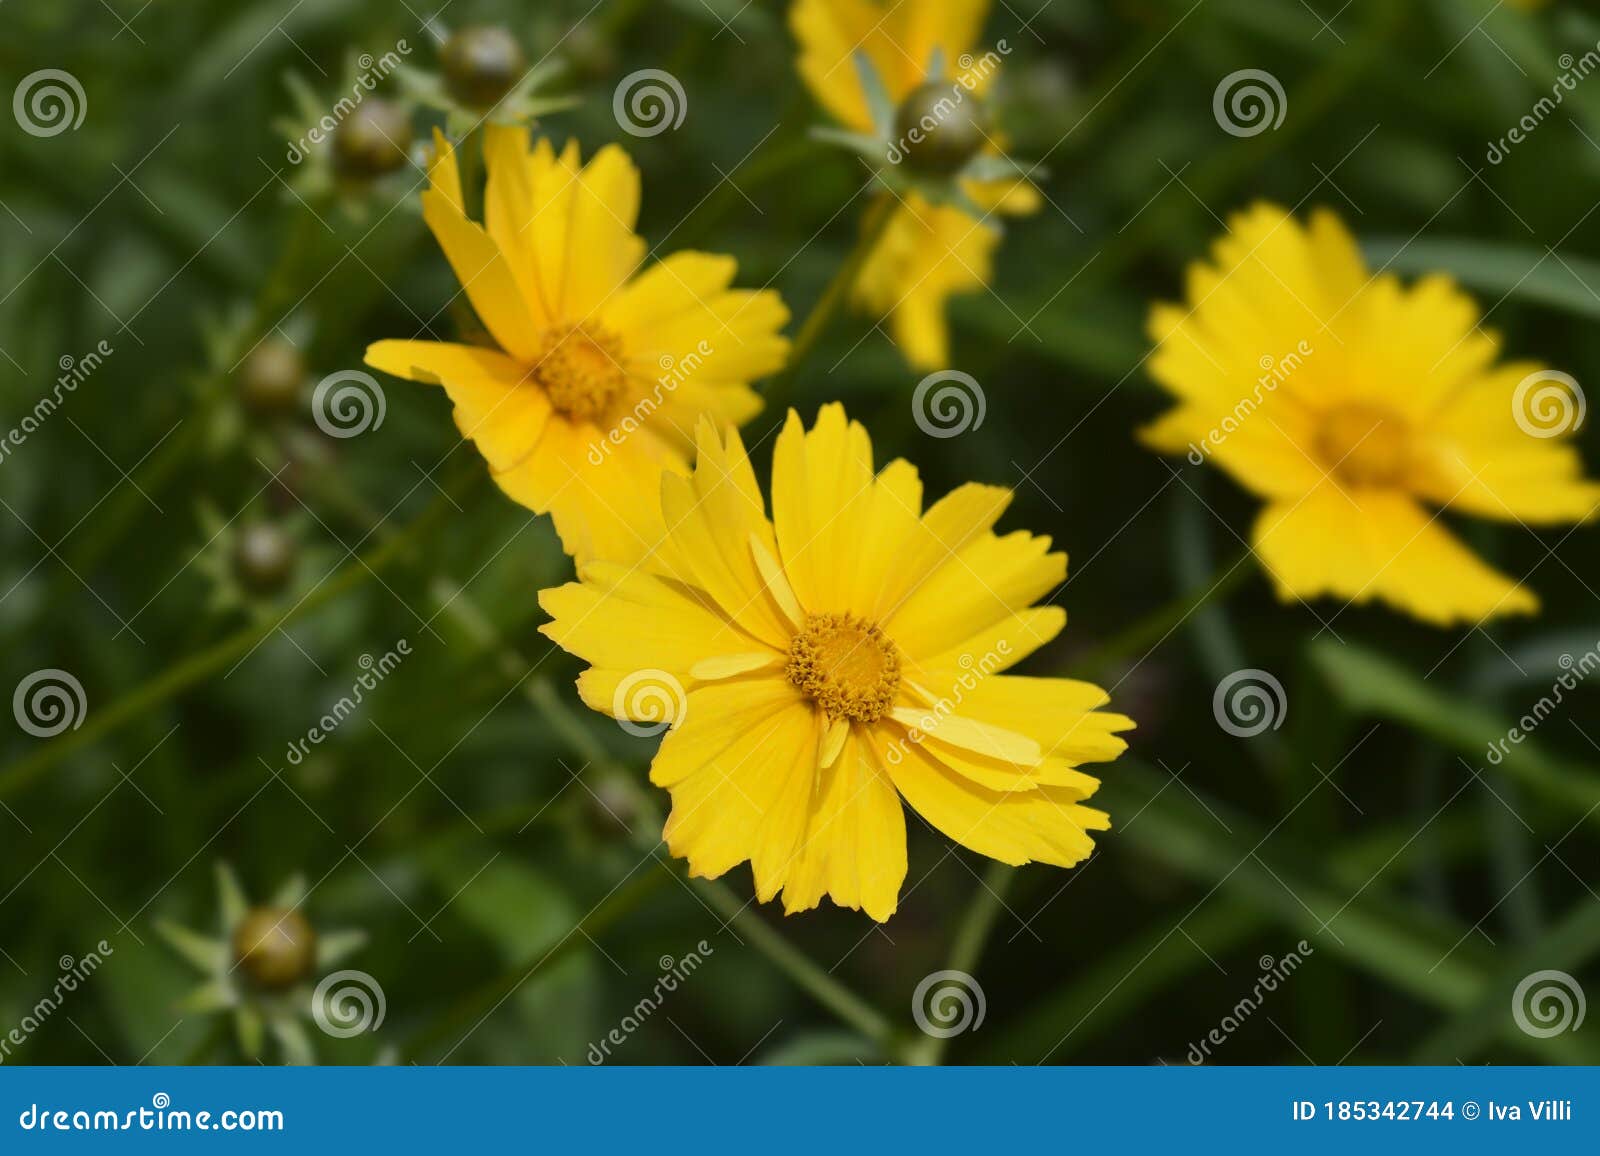 Large Flowered Tickseed Sonnenkind Stock Photo Image Of Baby Gold 185342744